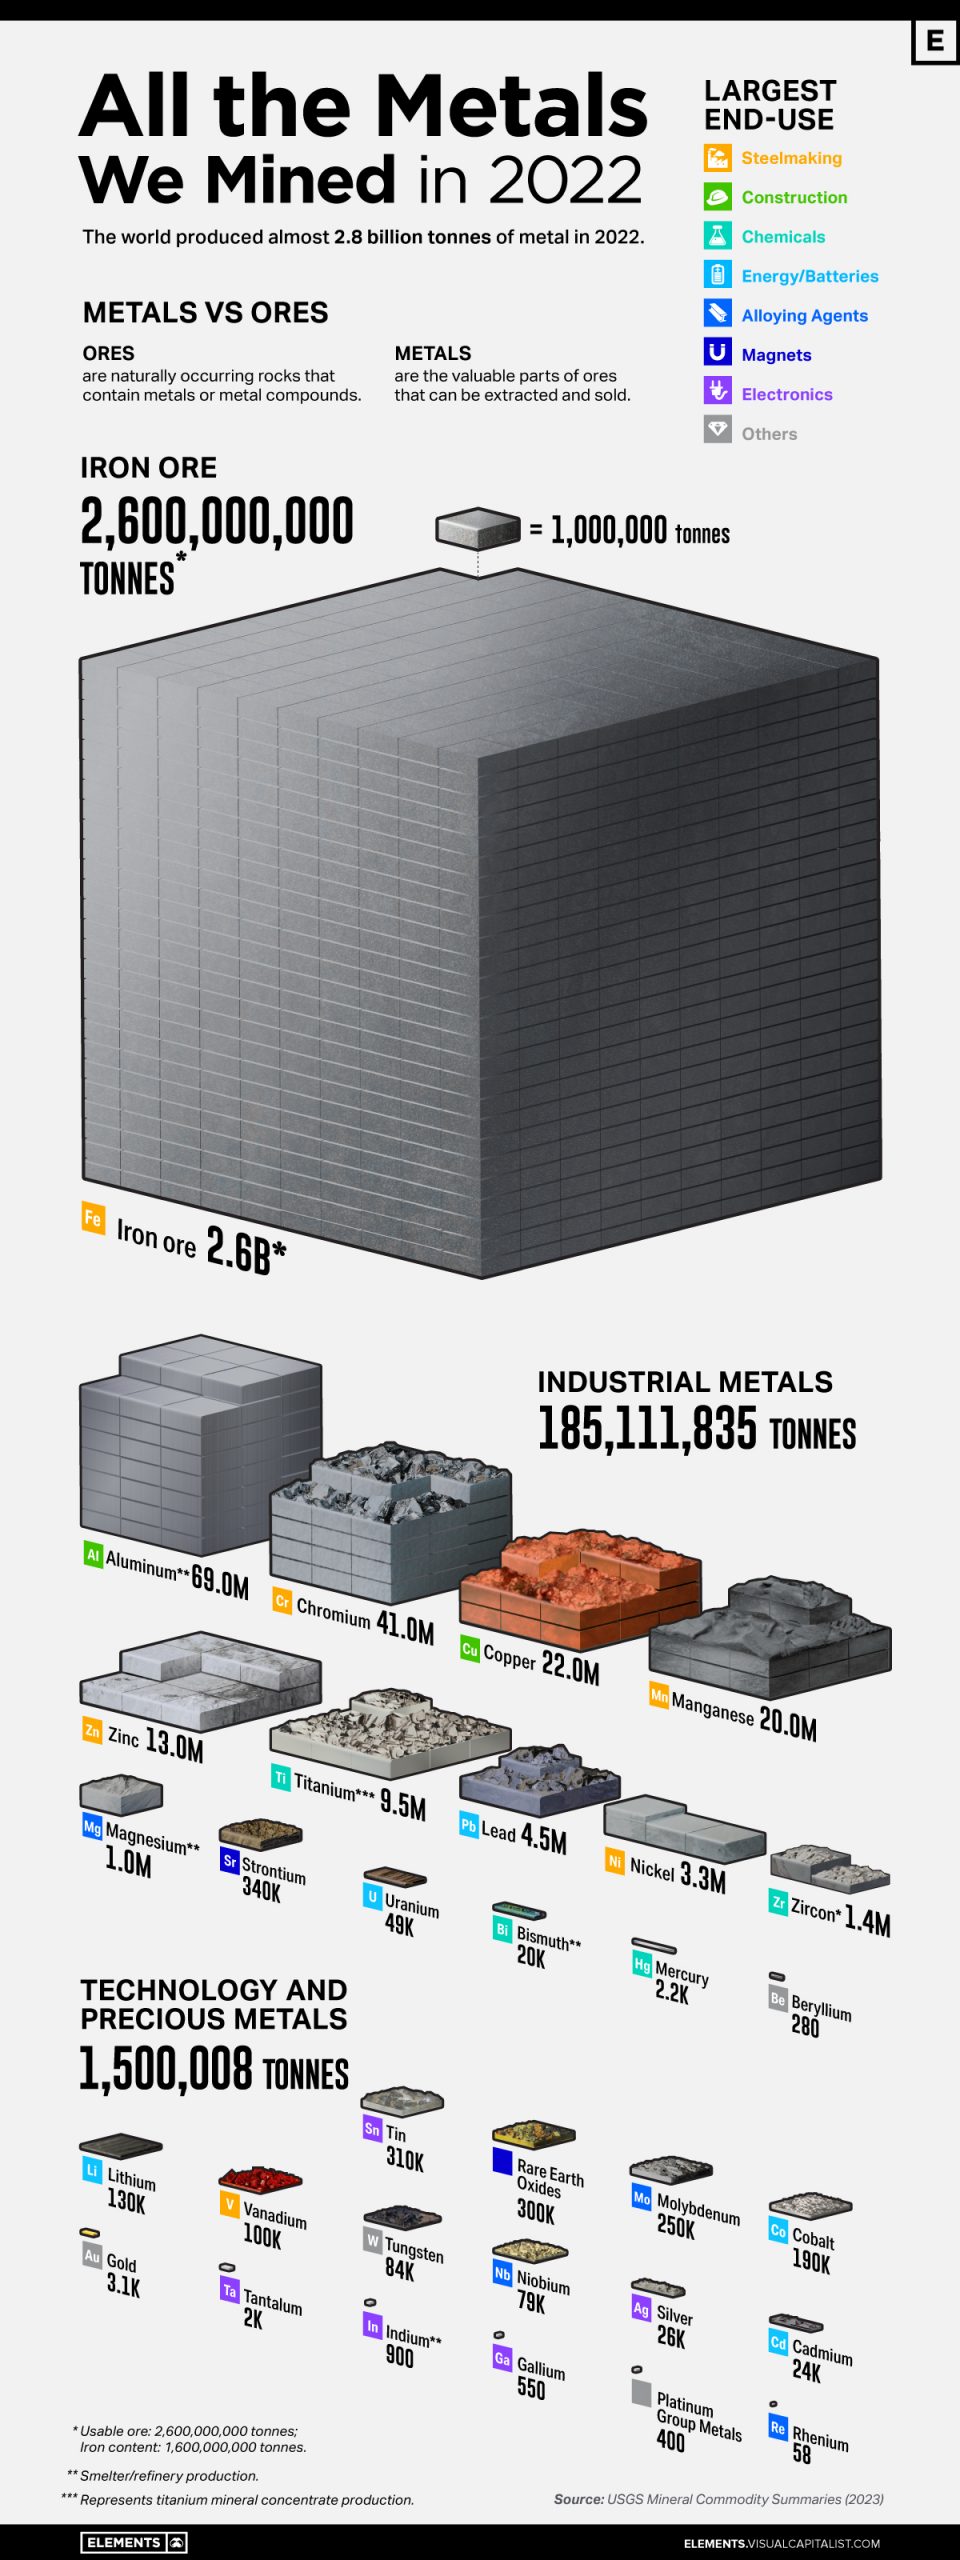 All the Metals We Mined in 2022 - Infographic